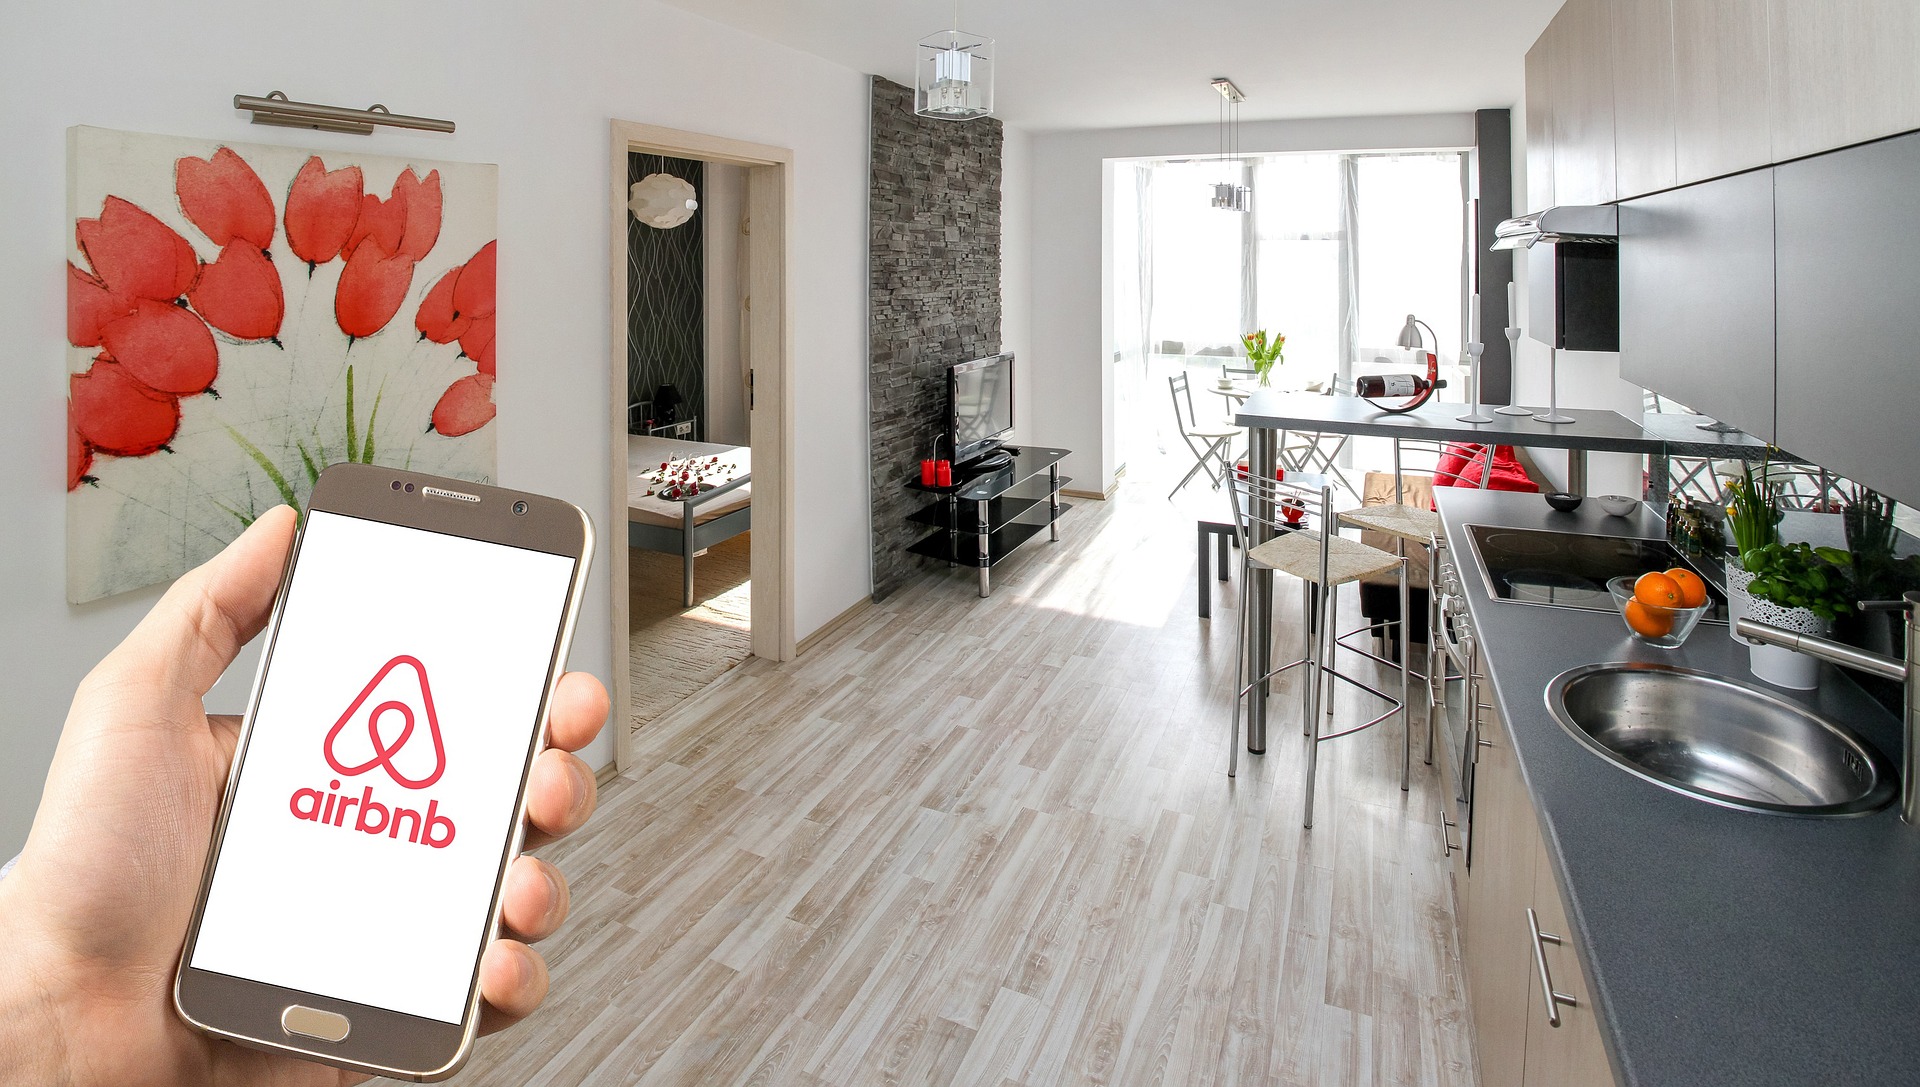 4 Tips for Turning Your Home Into a Successful Airbnb From the Start 